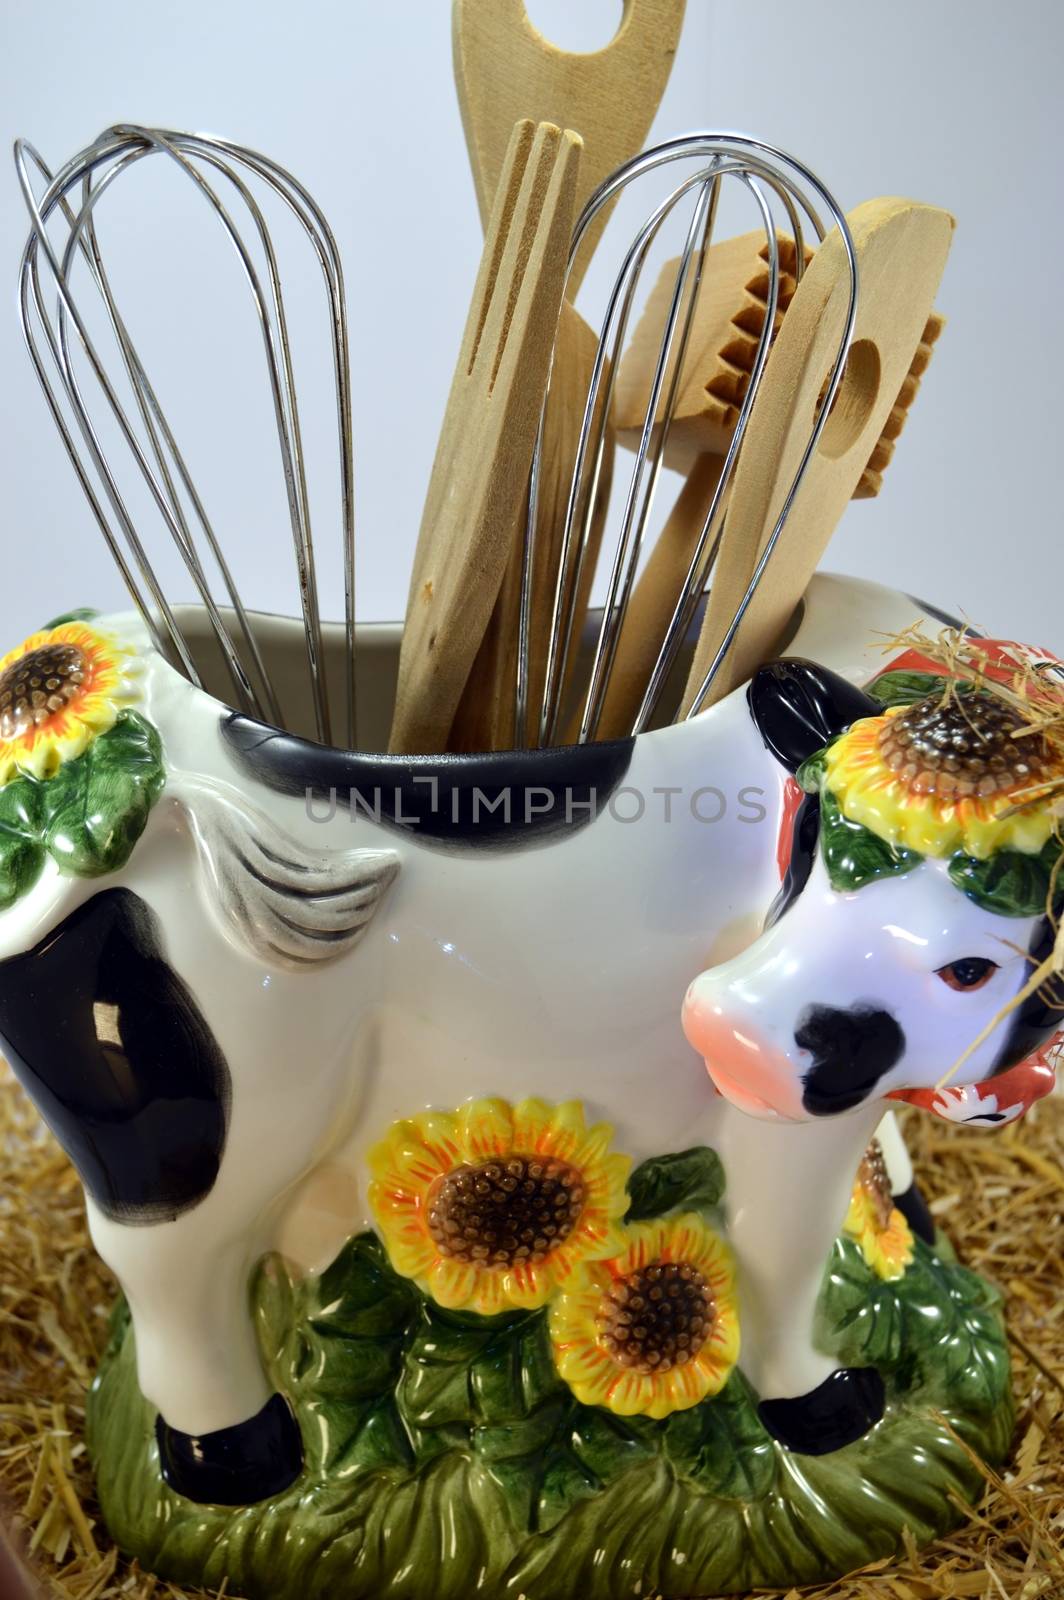 Distort cow with the hollow back and the kitchen utensils on a white bottom